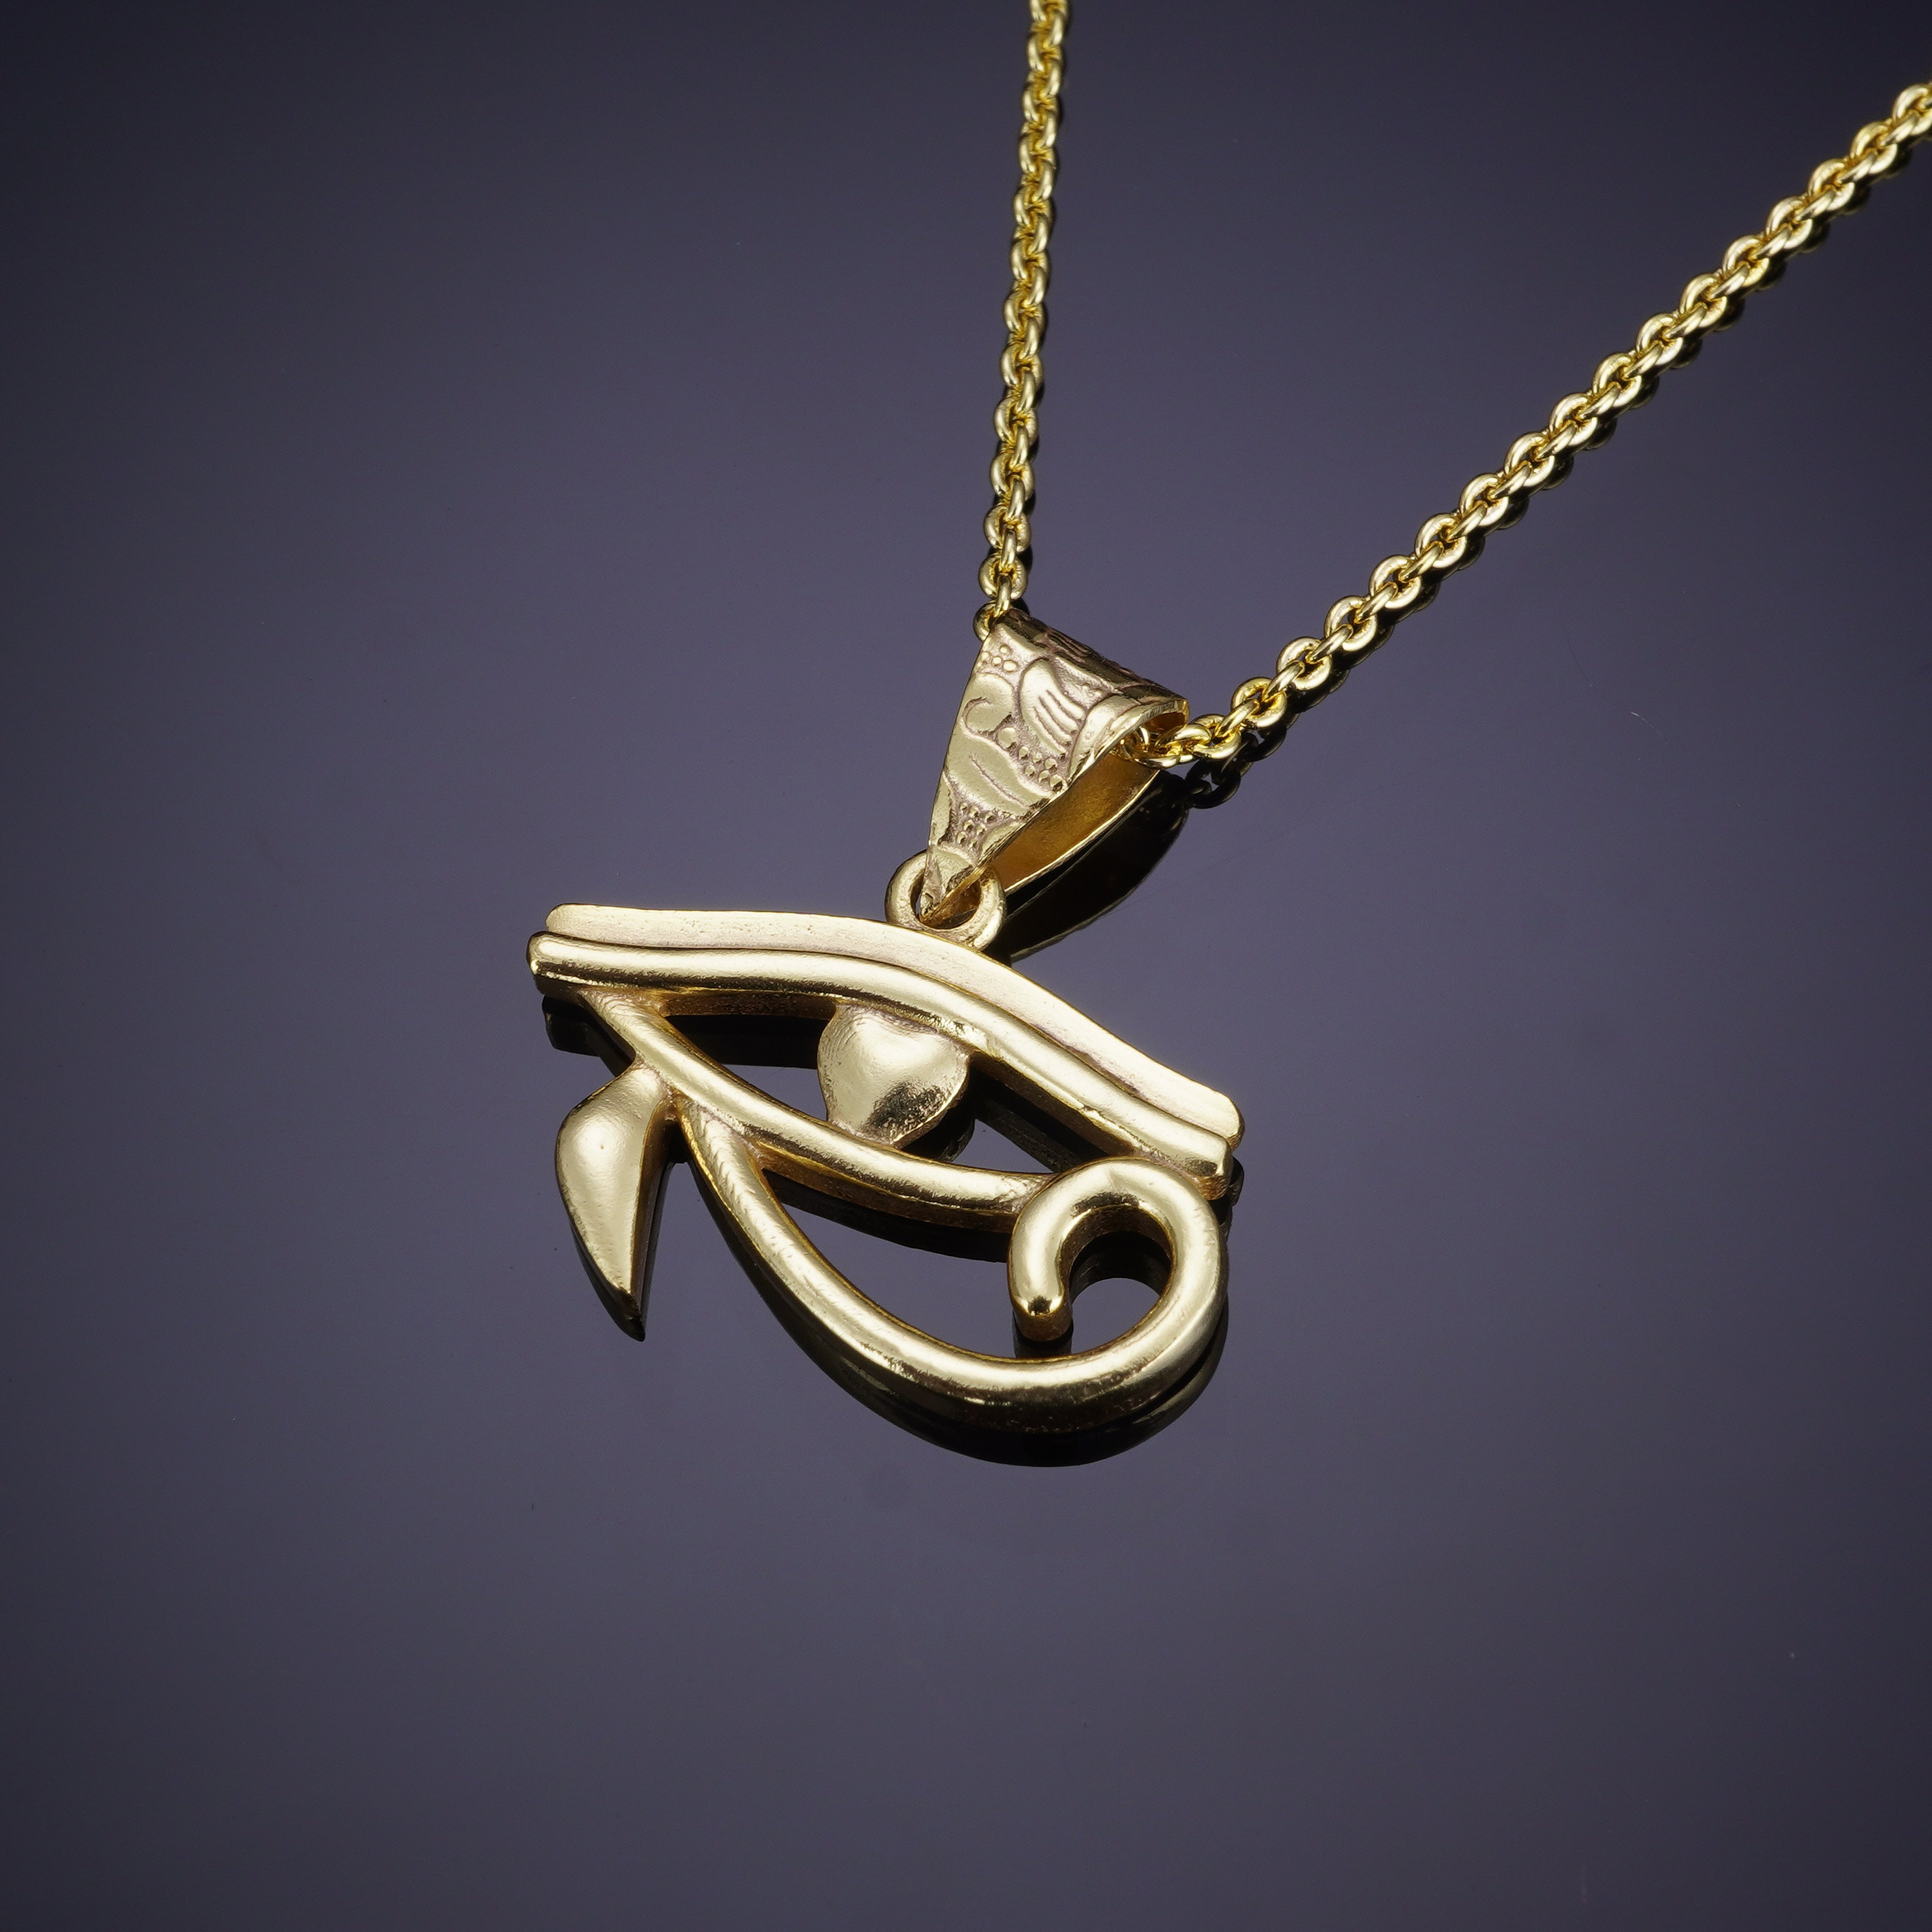 Buy Golden Evil Eye Necklace by FUSIO at Ogaan Online Shopping Site